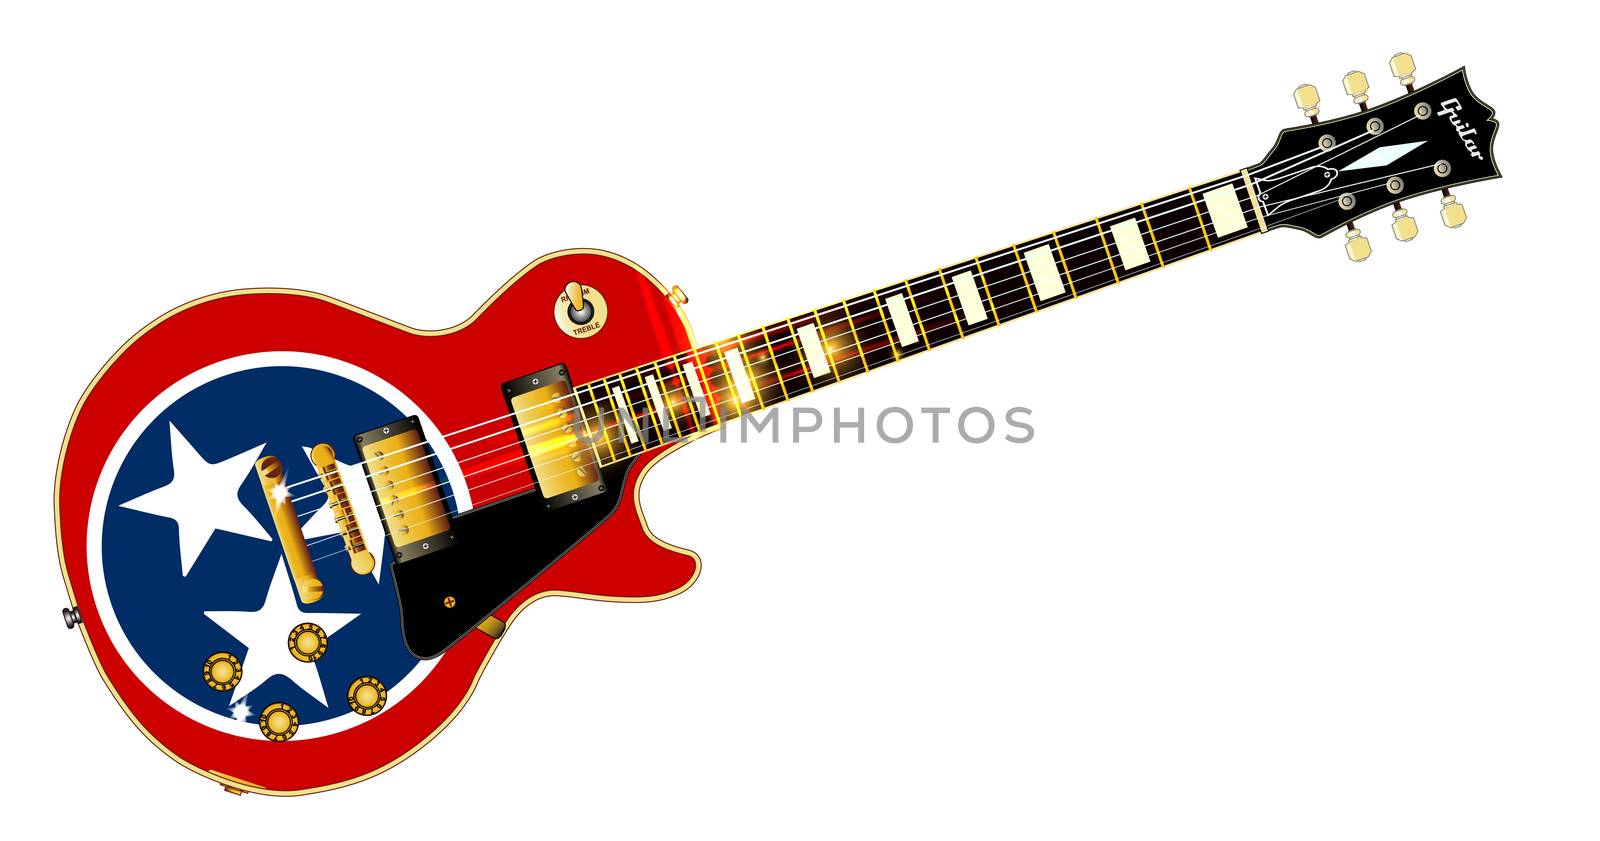 The definitive rock and roll guitar with the Tennessee flag isolated over a white background.